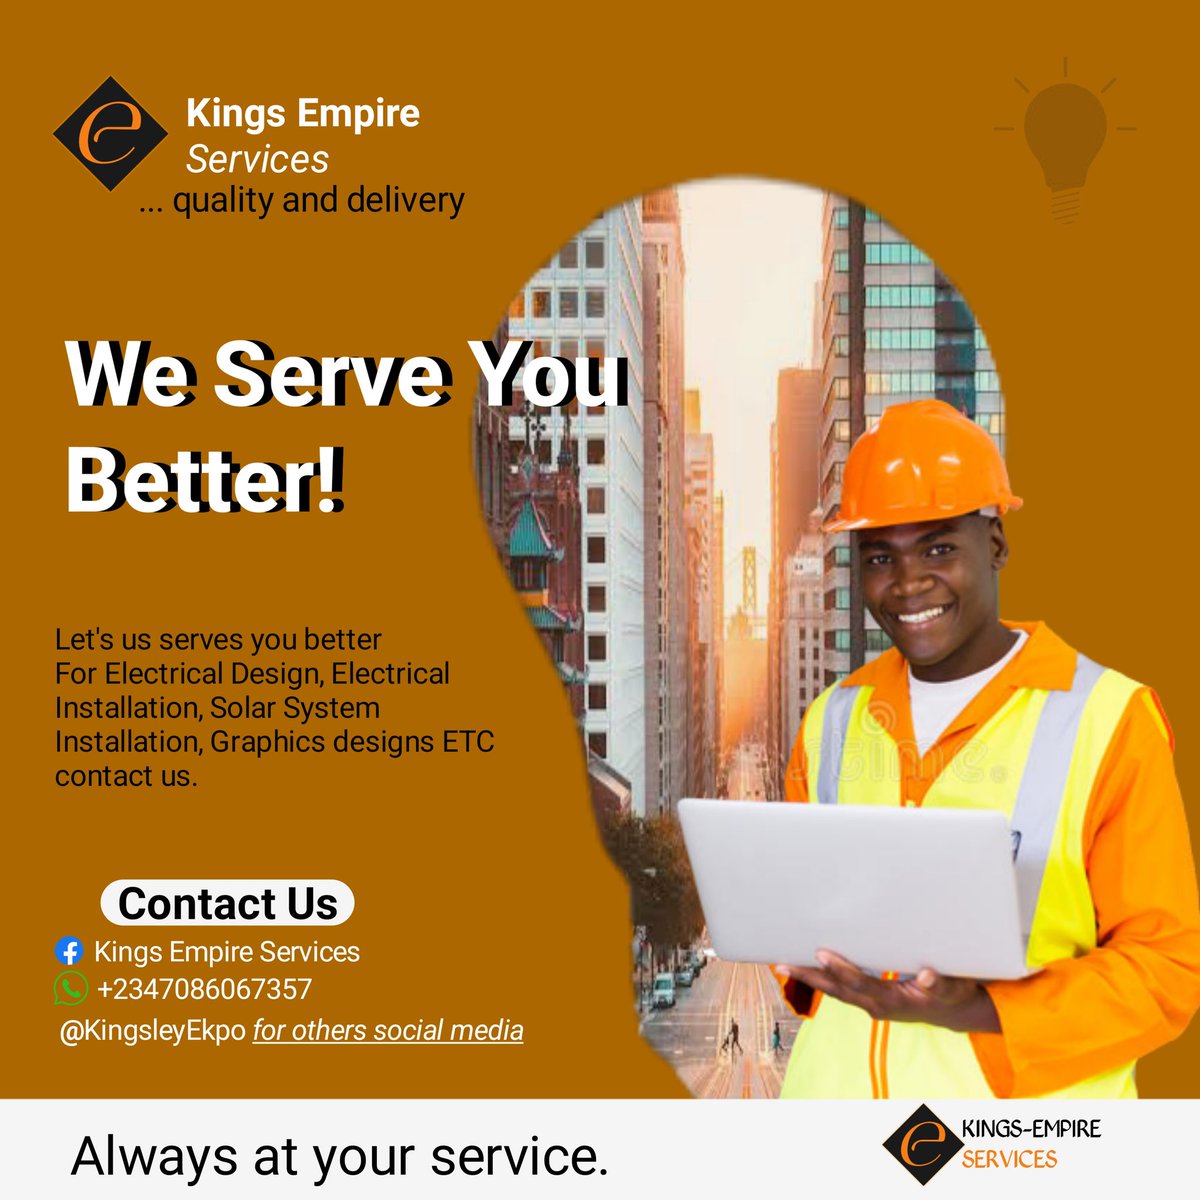 #KingsEmpireServices

We Serve You Better

#electricalinstallation #solarinstallation #electricaldesign #graphicdesign